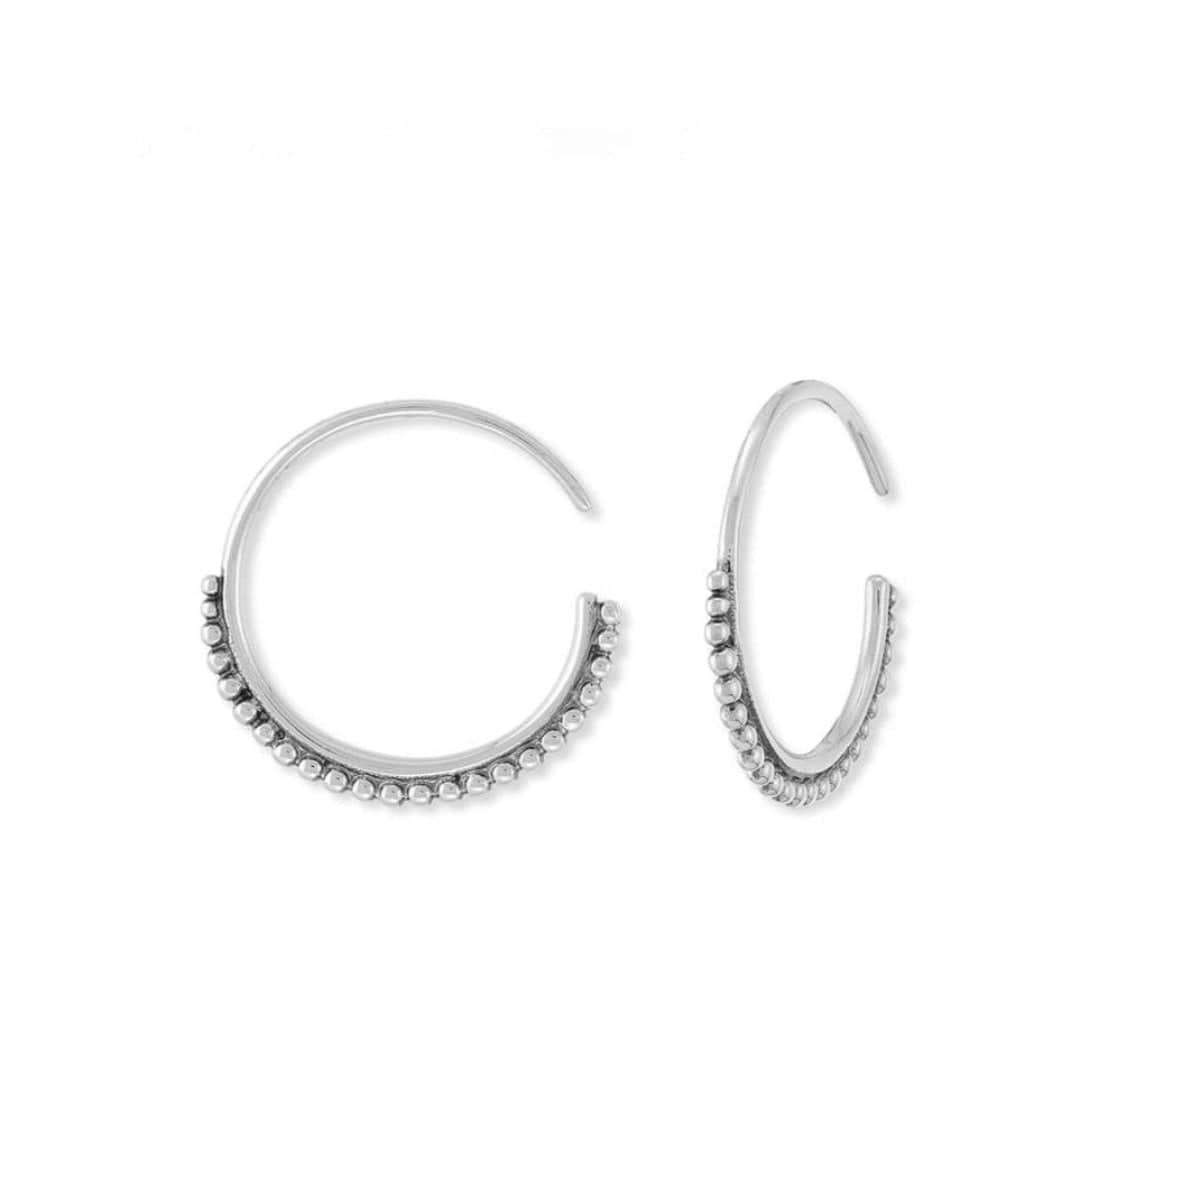 Boma Jewelry Earrings Dot Pull Through Hoops